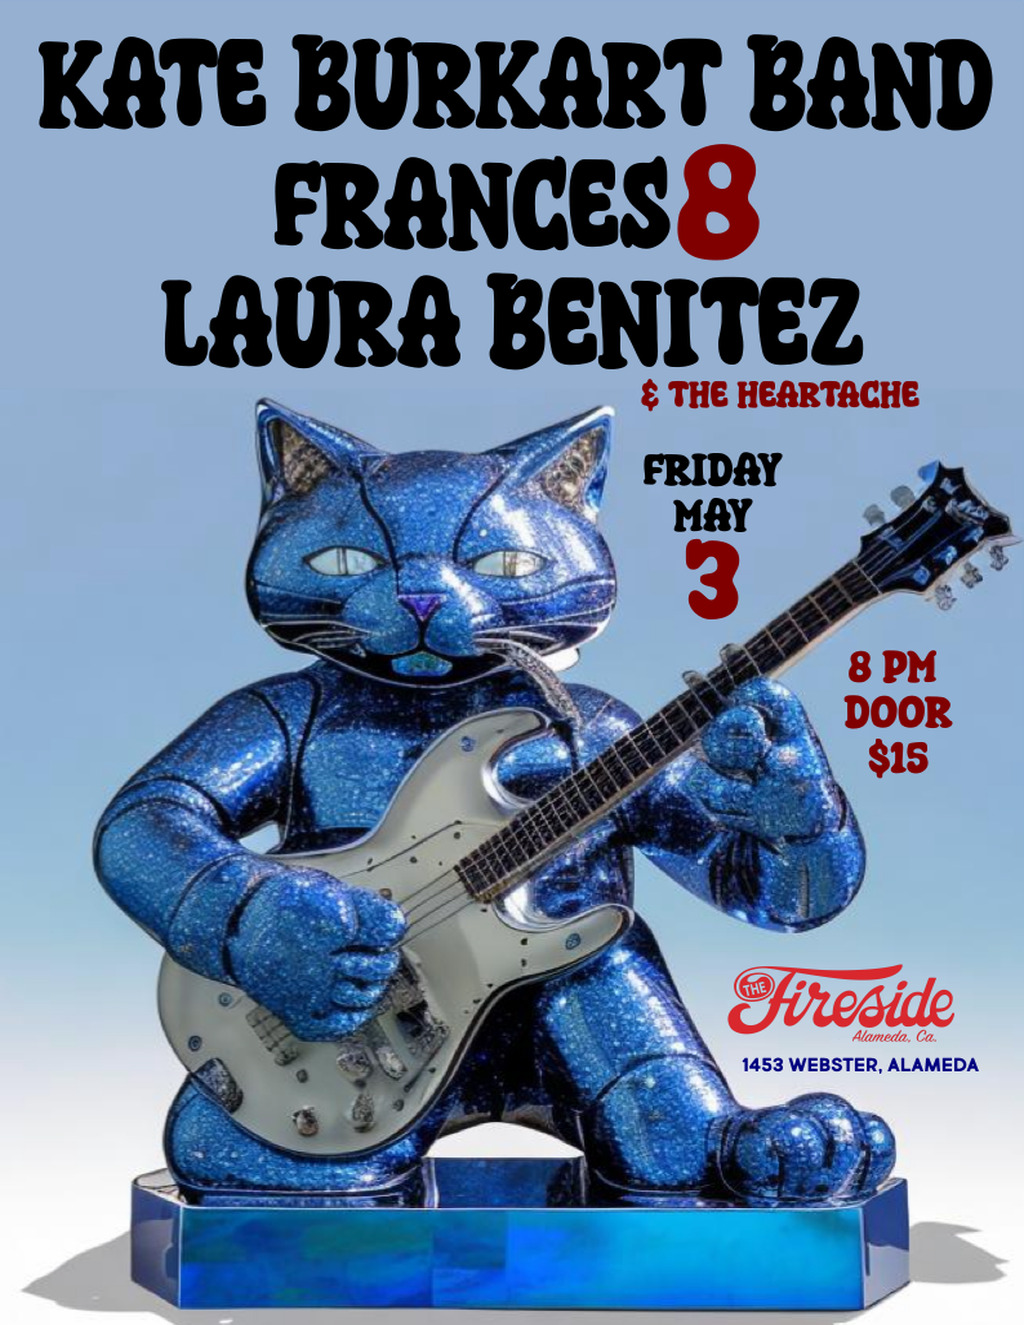 The Fireside Lounge Fireside Lounge Presents  Live Music on Friday  May 8th  promotion flier on Digifli com